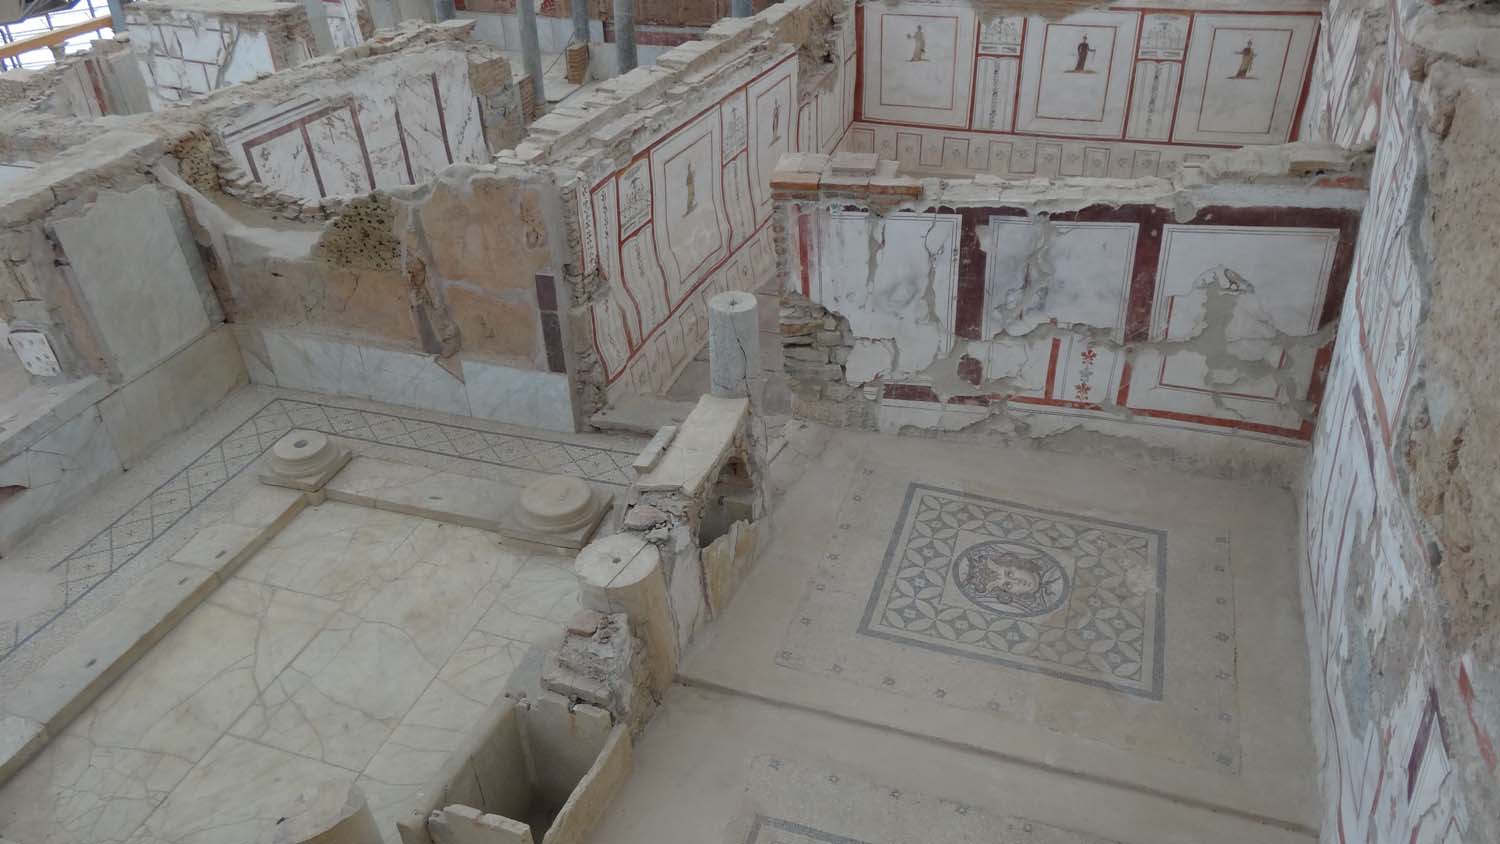 incredibly detailed mosaics in the townhouses of the wealthy in Ephesus